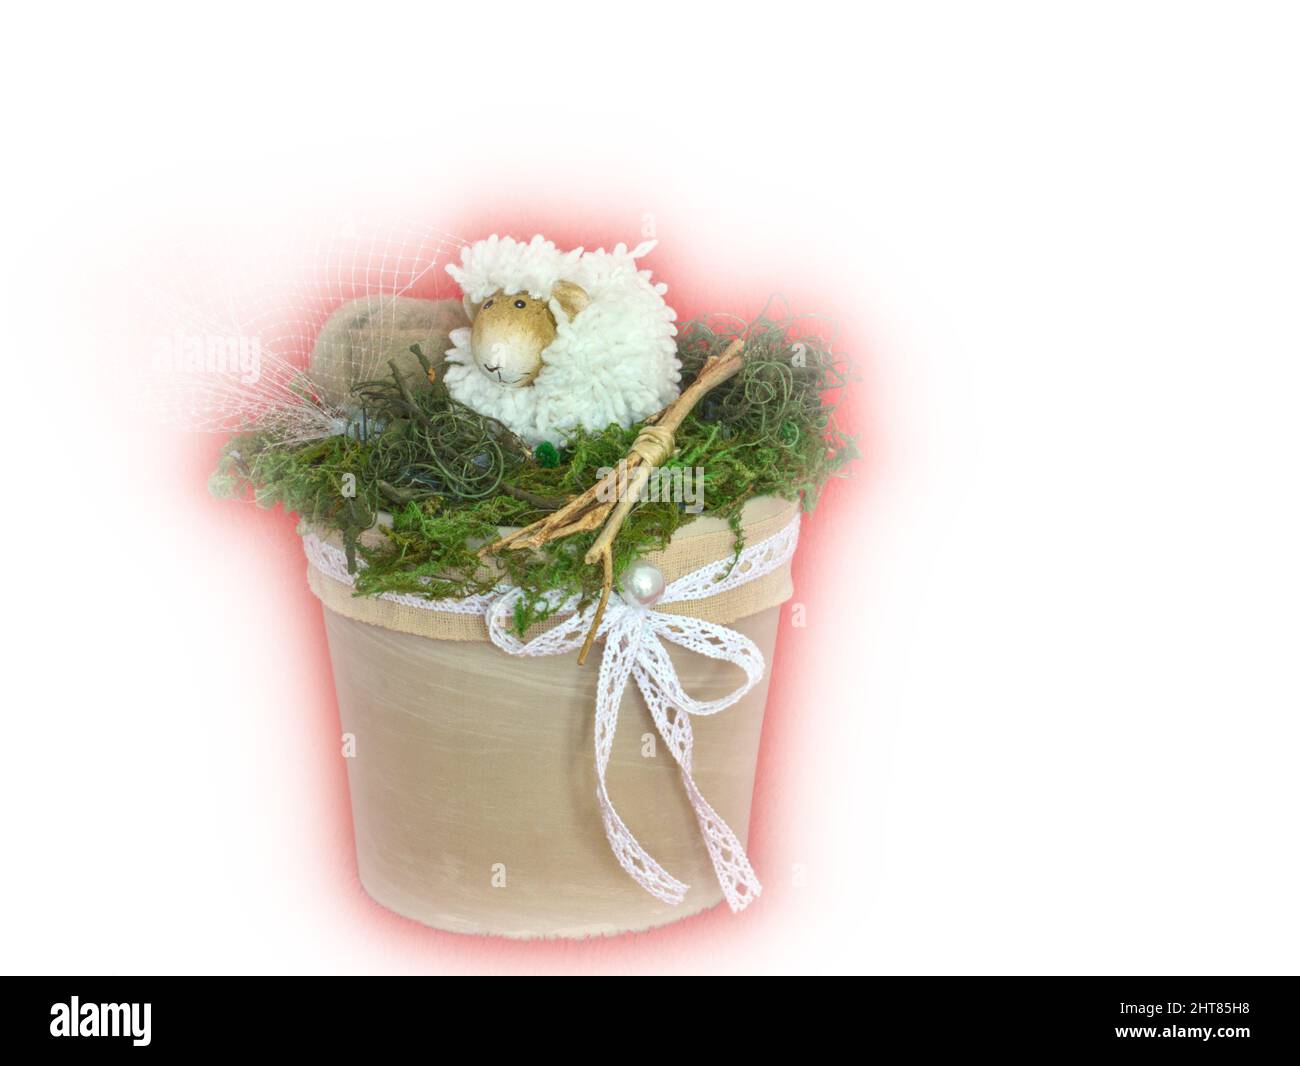 Handmade easter arrangement with sheep figure and moss in pot on white background Stock Photo